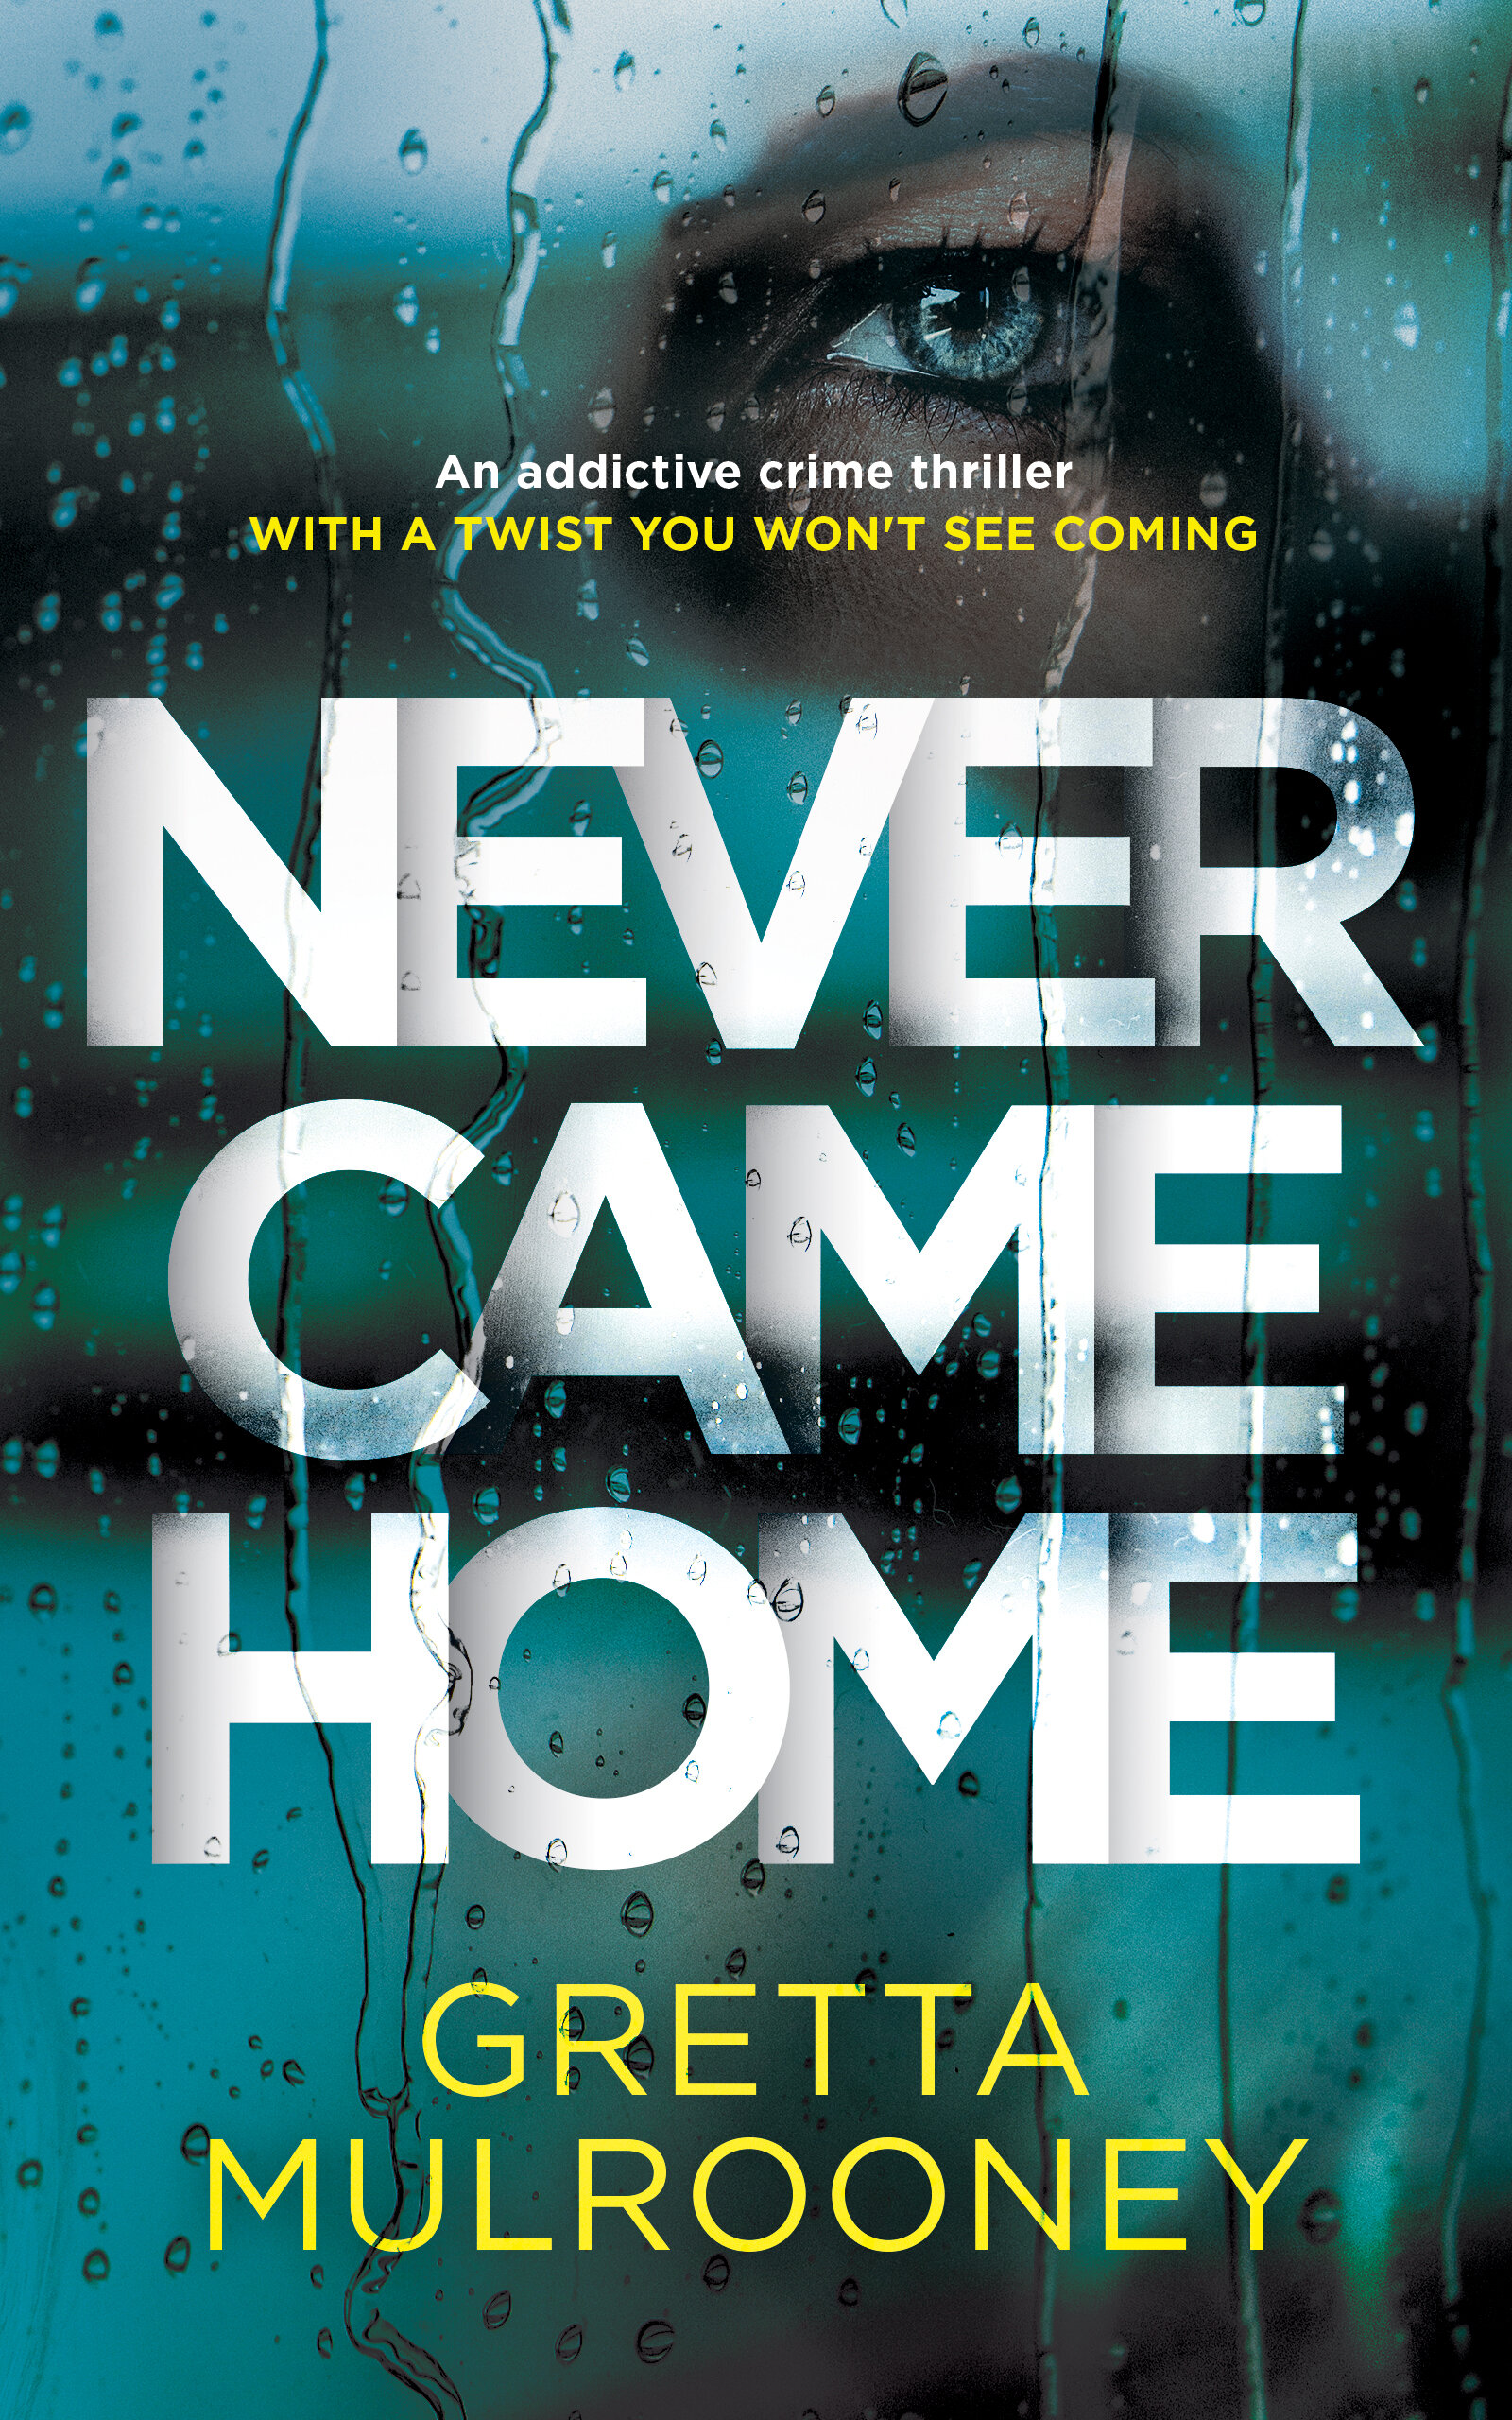 NEVER CAME HOME Publish.jpg